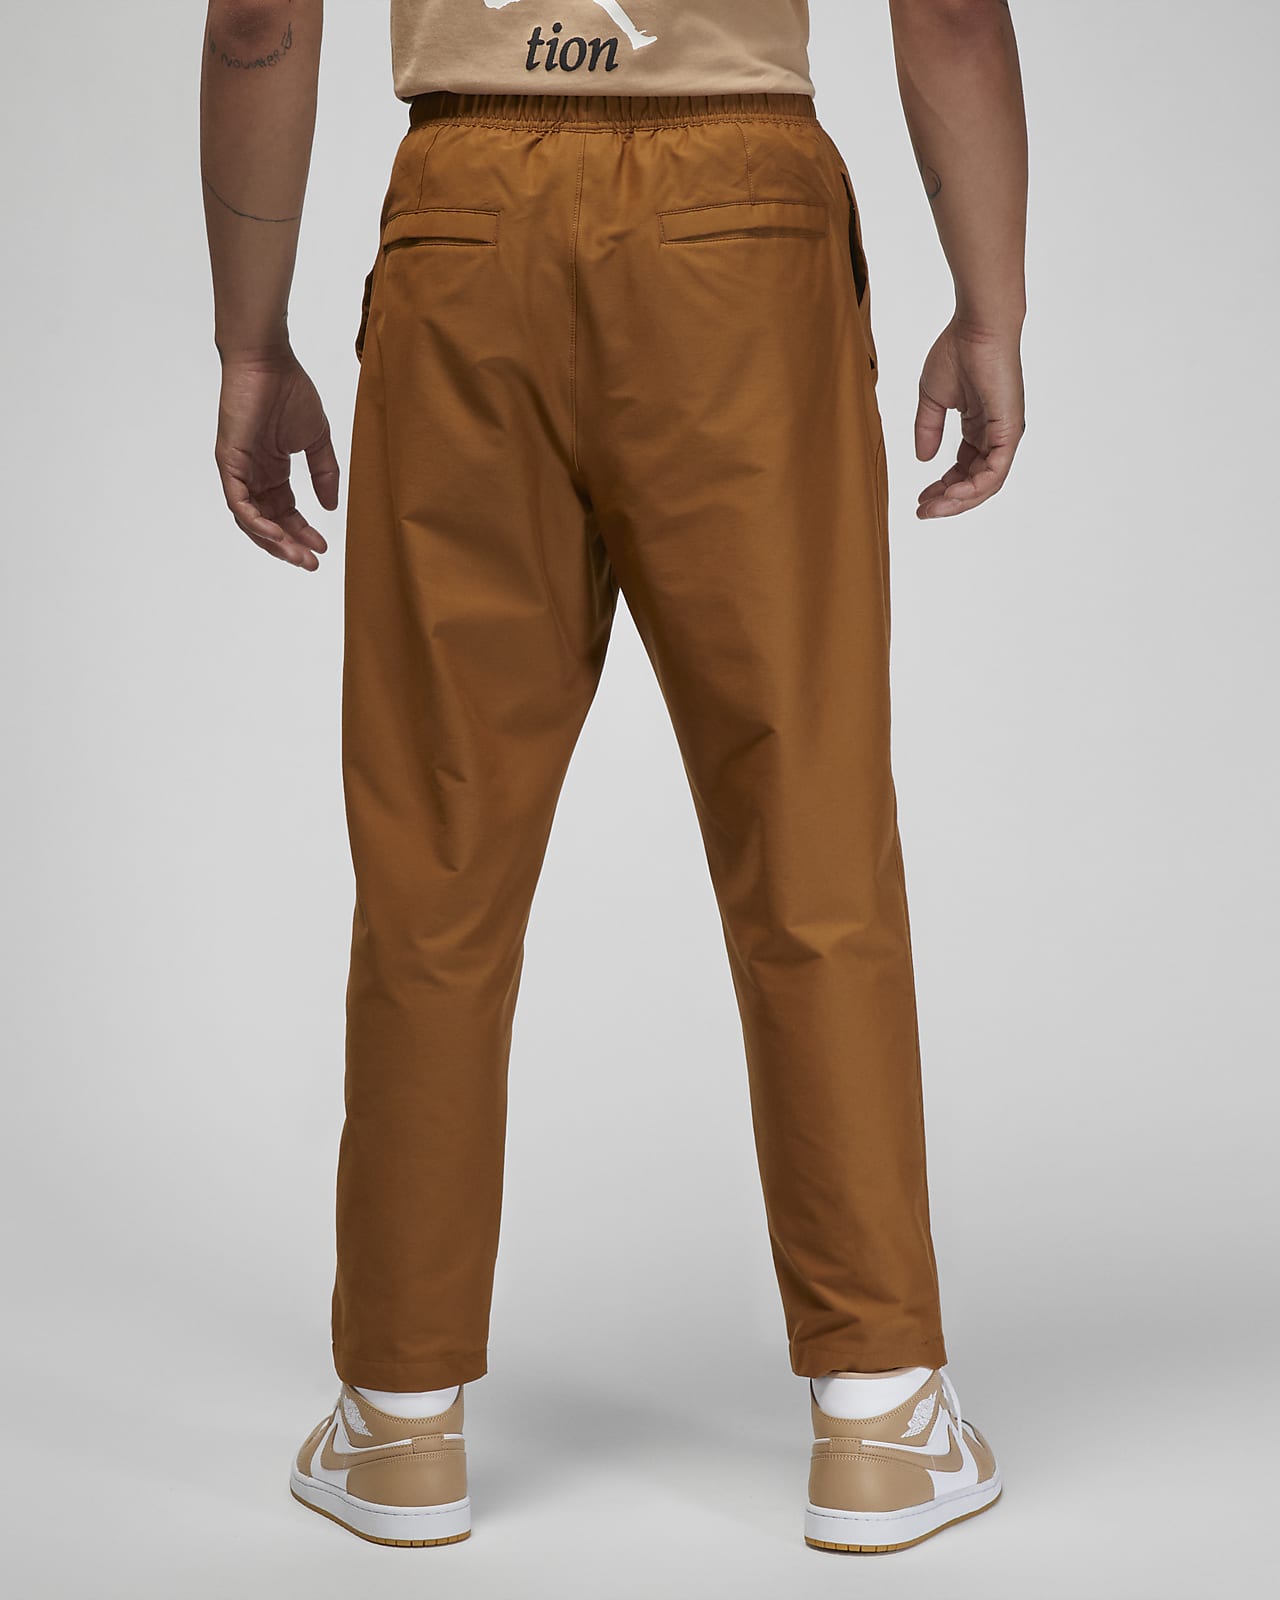 Unisex, comfortable, cotton, cropped pants made in Brooklyn. — uzinyc